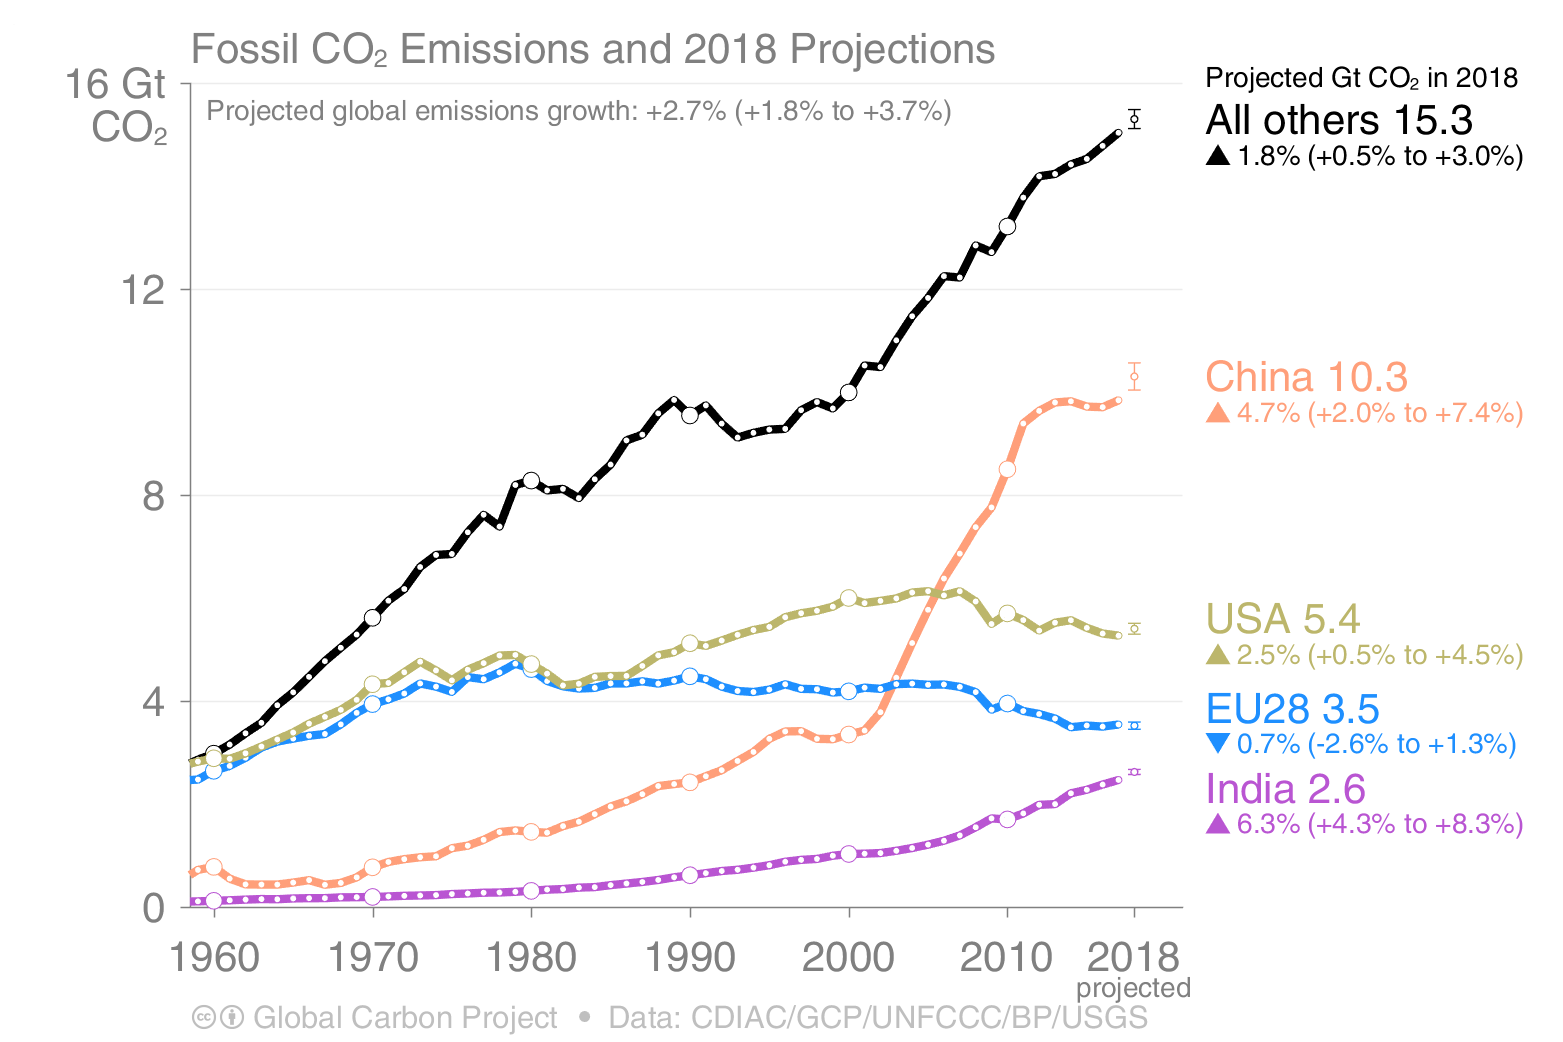 Fossil CO2 emissions by India, Europa, USA, China and others 1960-2018